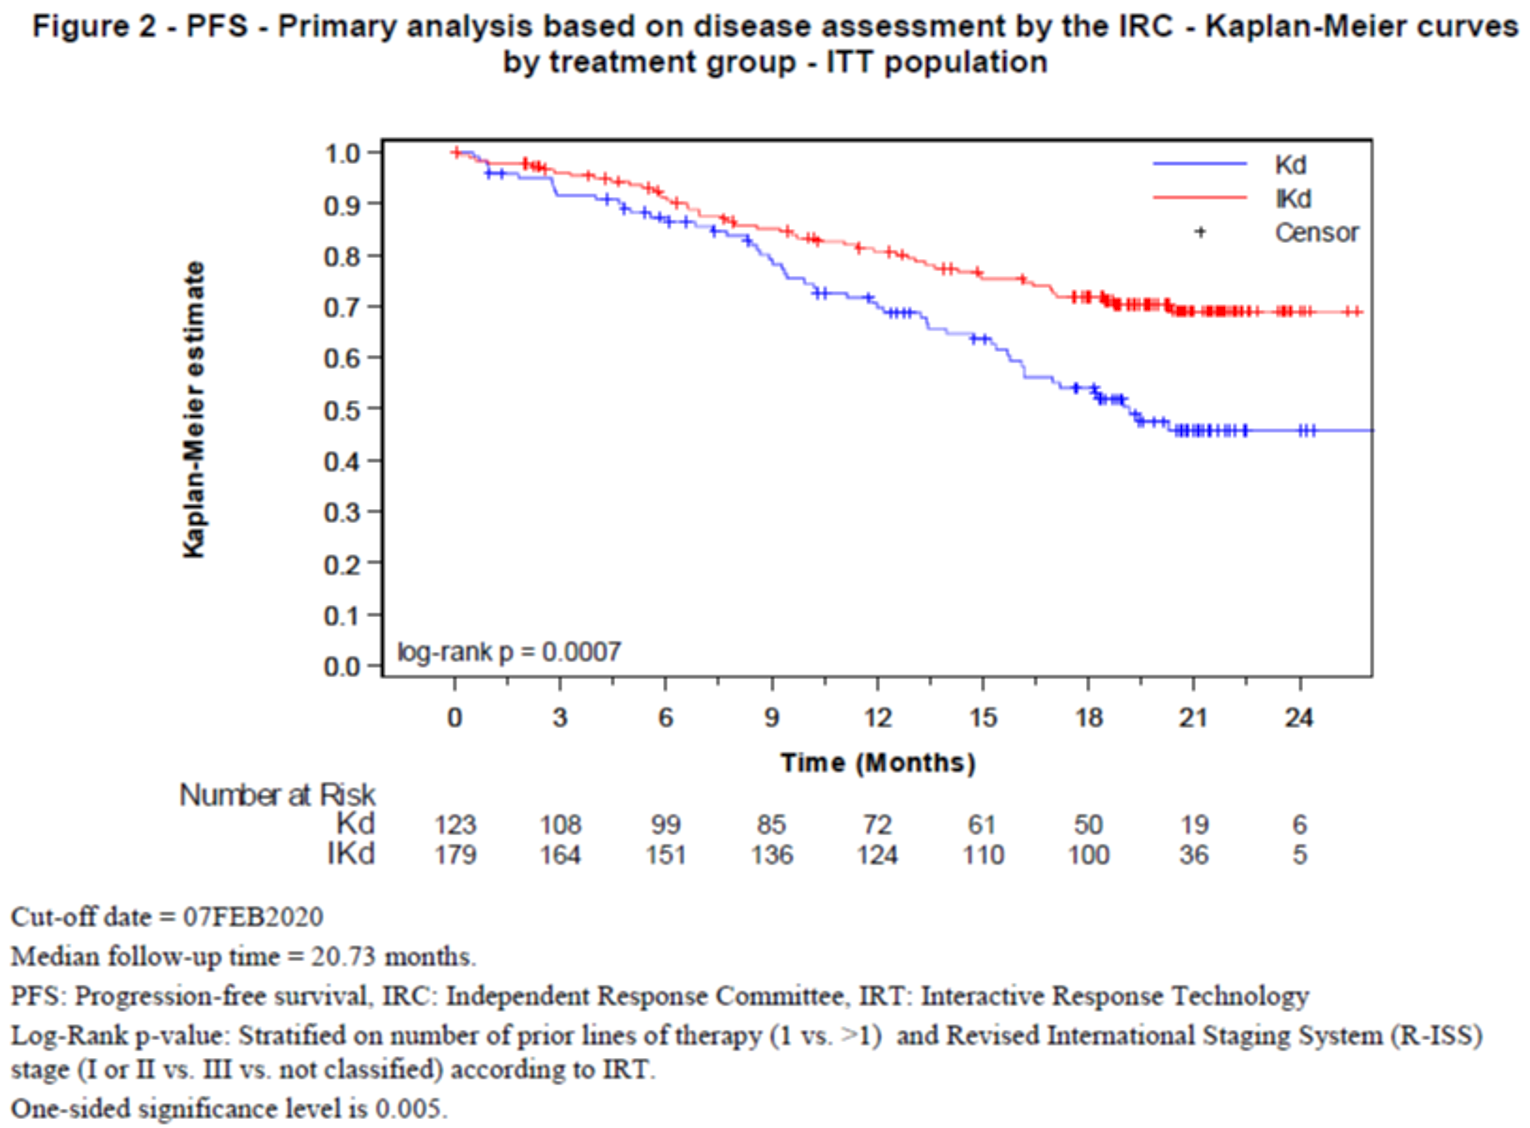 In this Kaplan-Meier analysis of overall survival for patients with MM, the number of patients treated with Kd at 0, 3, 6, 9, 12, 15, 18, 21, and 24 months was 123, 108, 99, 85, 72, 61, 50, 19, and 6, respectively. The number of patients treated with IsaKd at 0, 3, 6, 9, 12, 15, 18, 21, and 24 months was 179, 164, 151, 136, 124, 110, 100, 36, and 5, respectively. Separation of the Kaplan-Meier curves is maintained overtime.